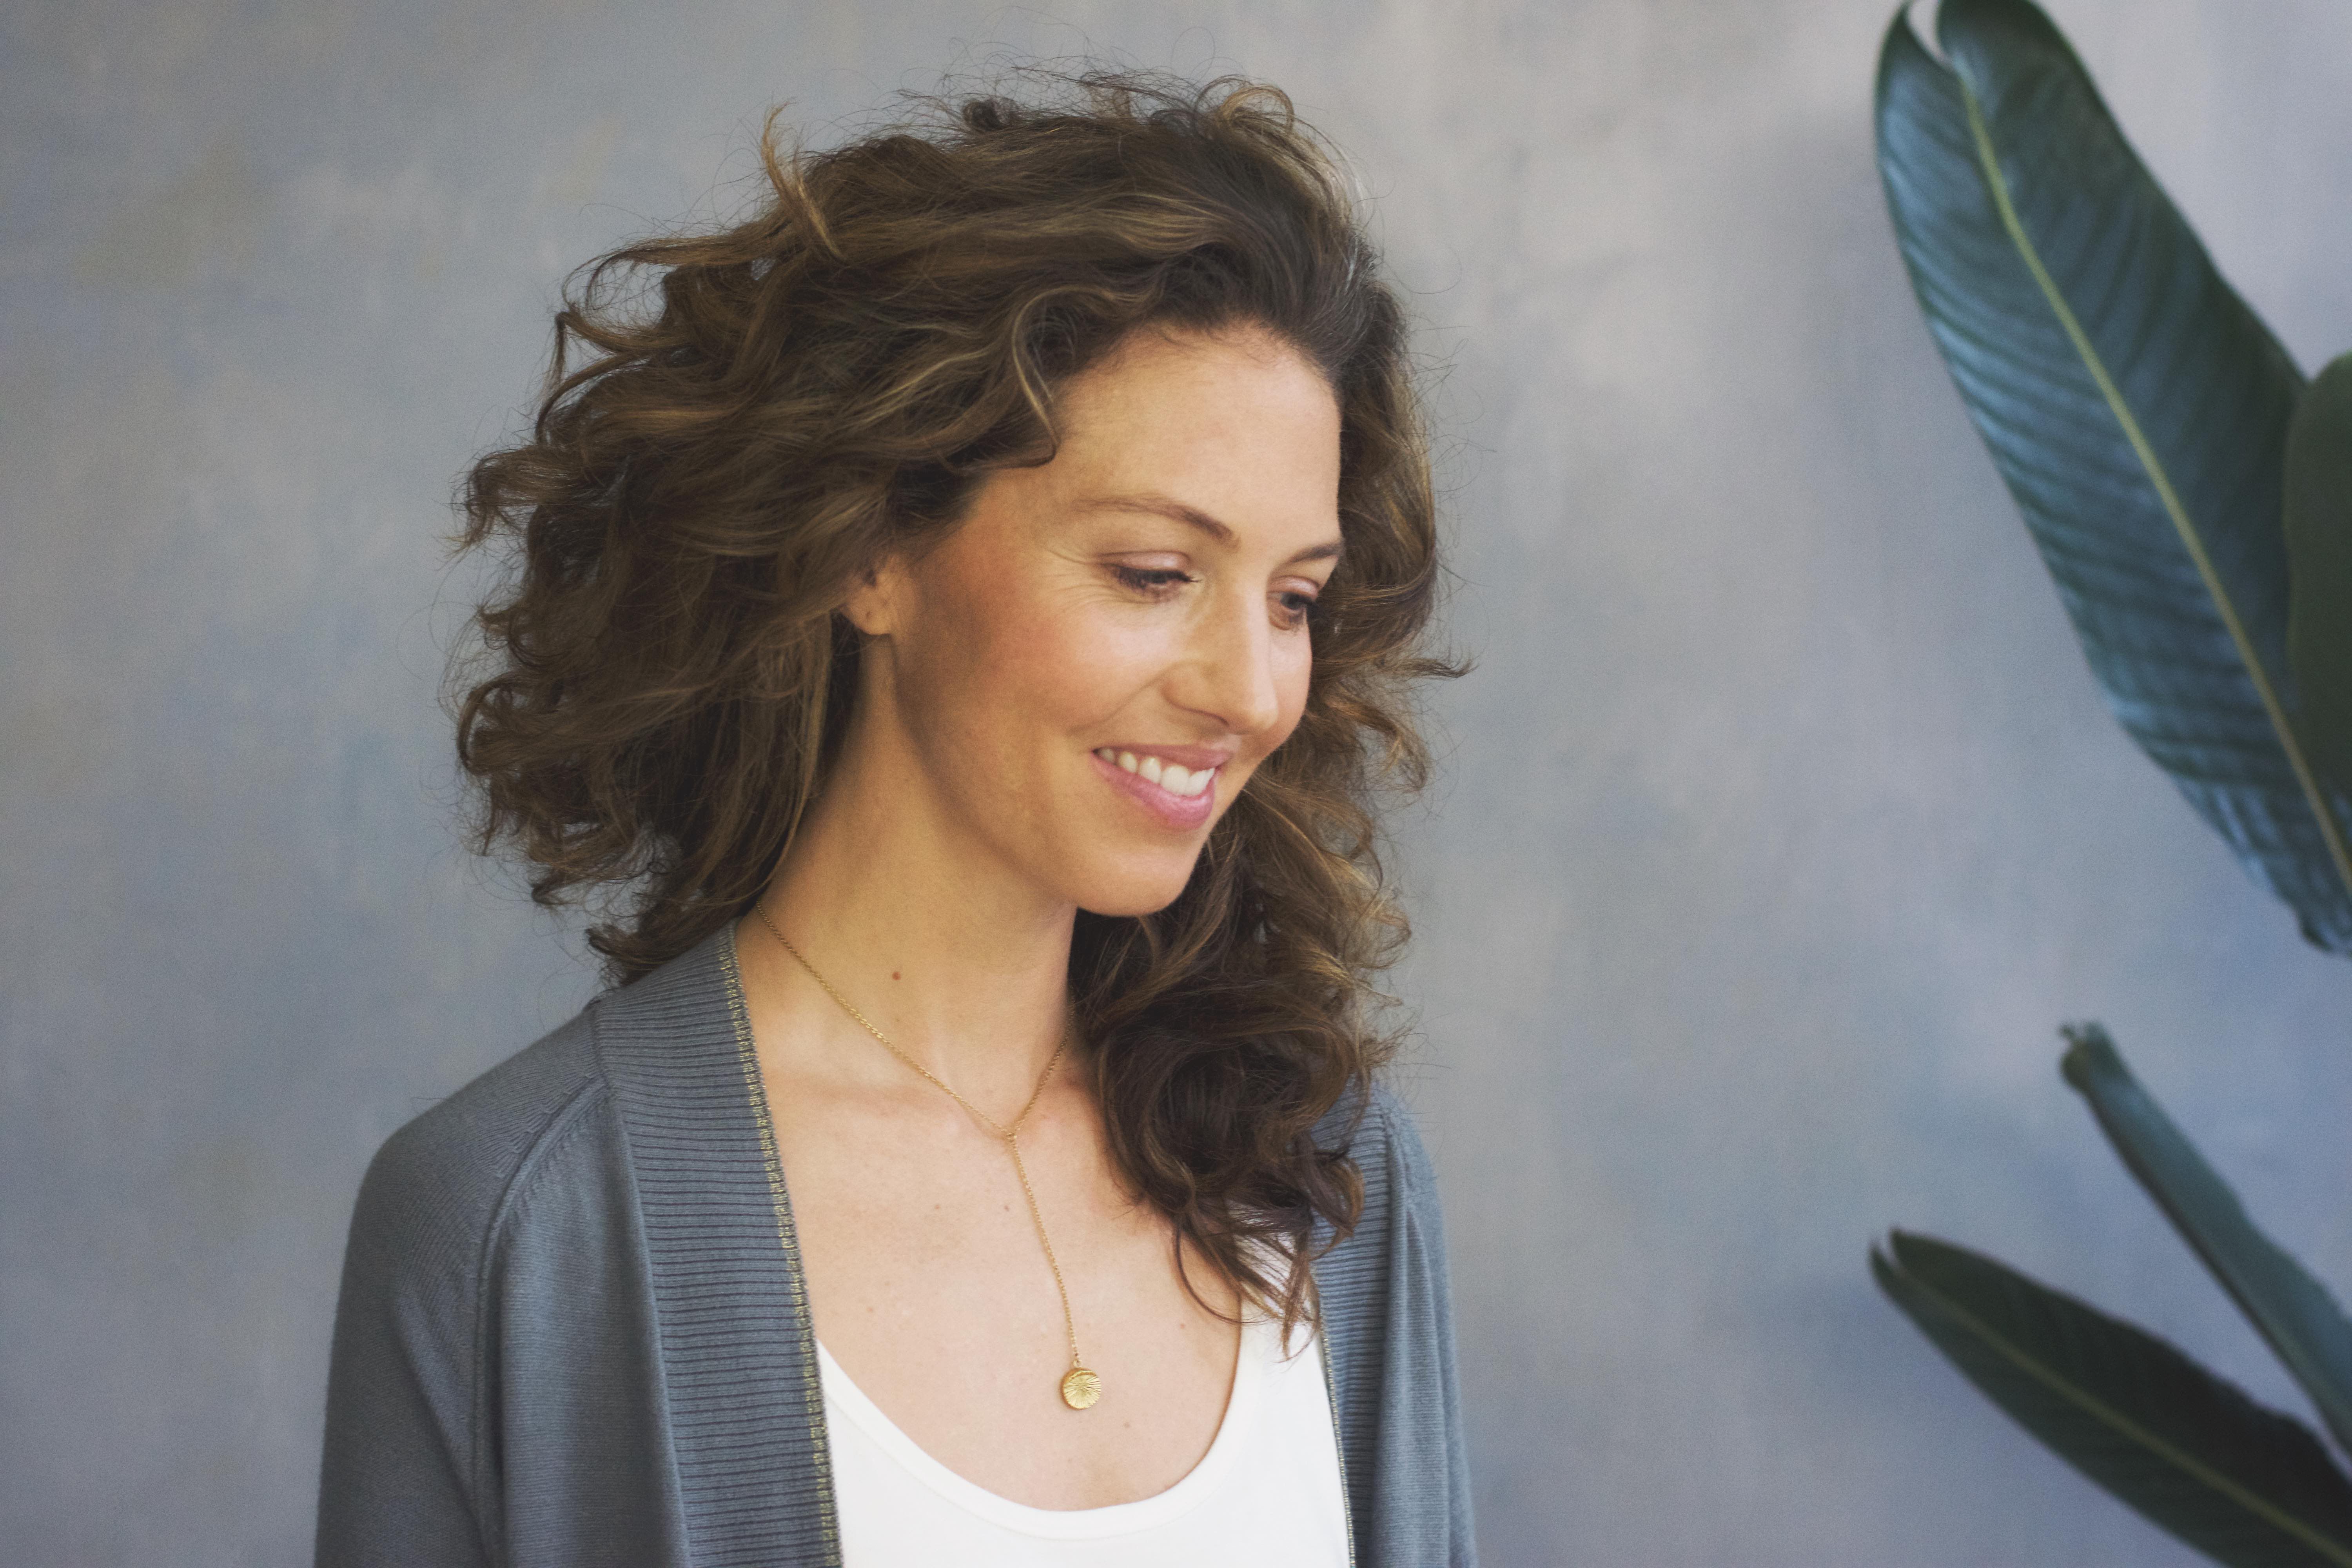 An interview with yoga and chakra expert Erica Jago